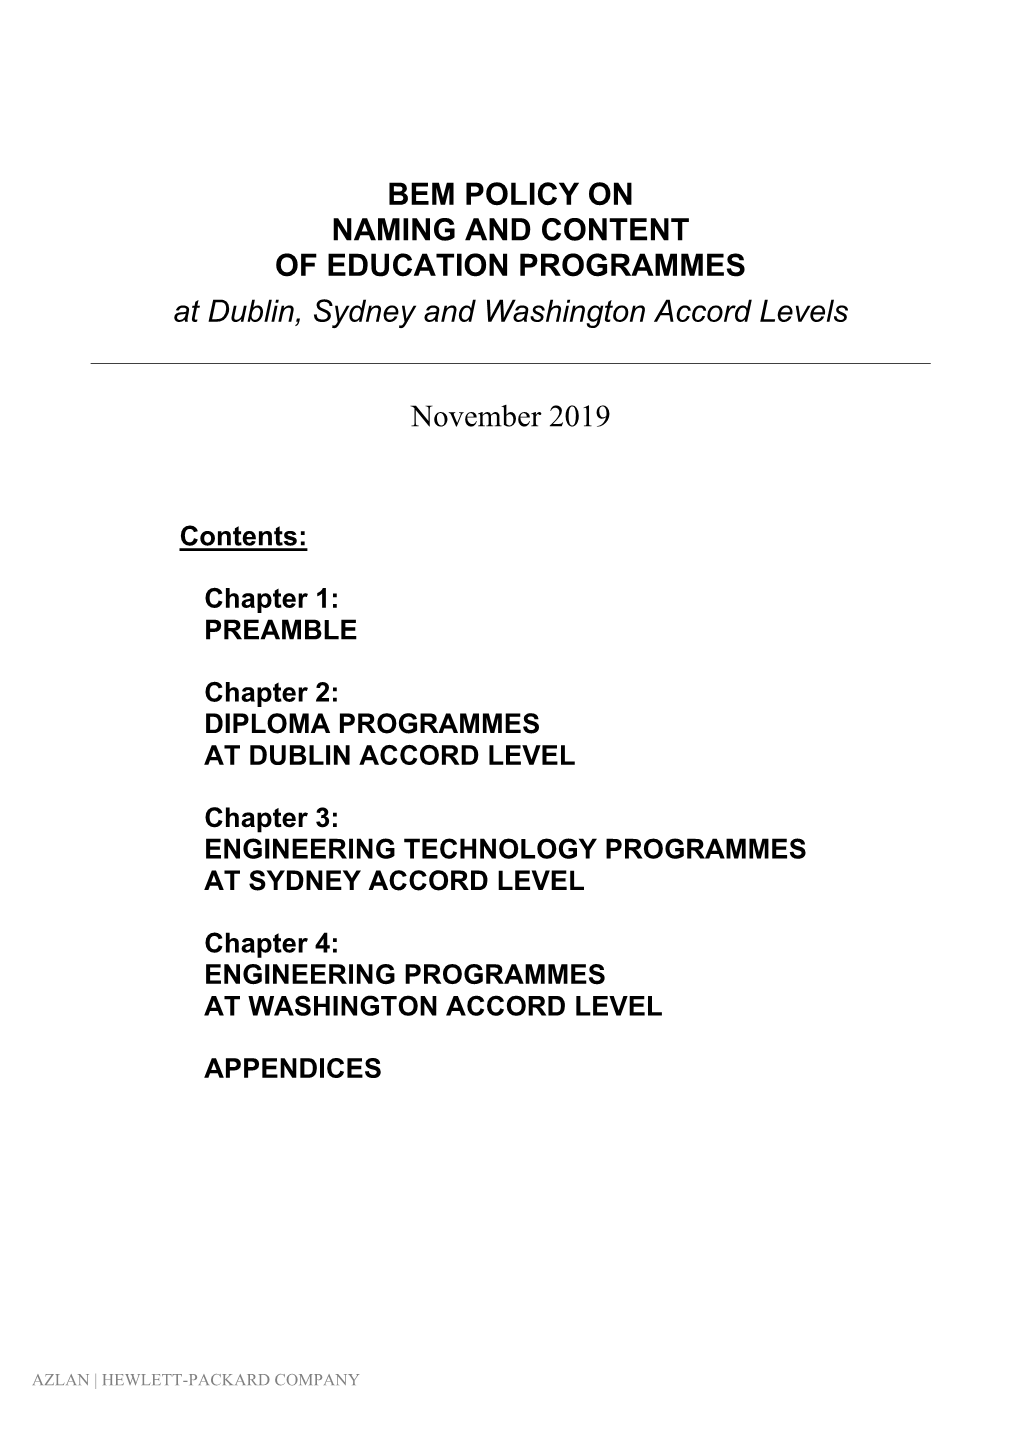 BEM POLICY on NAMING and CONTENT of EDUCATION PROGRAMMES at Dublin, Sydney and Washington Accord Levels